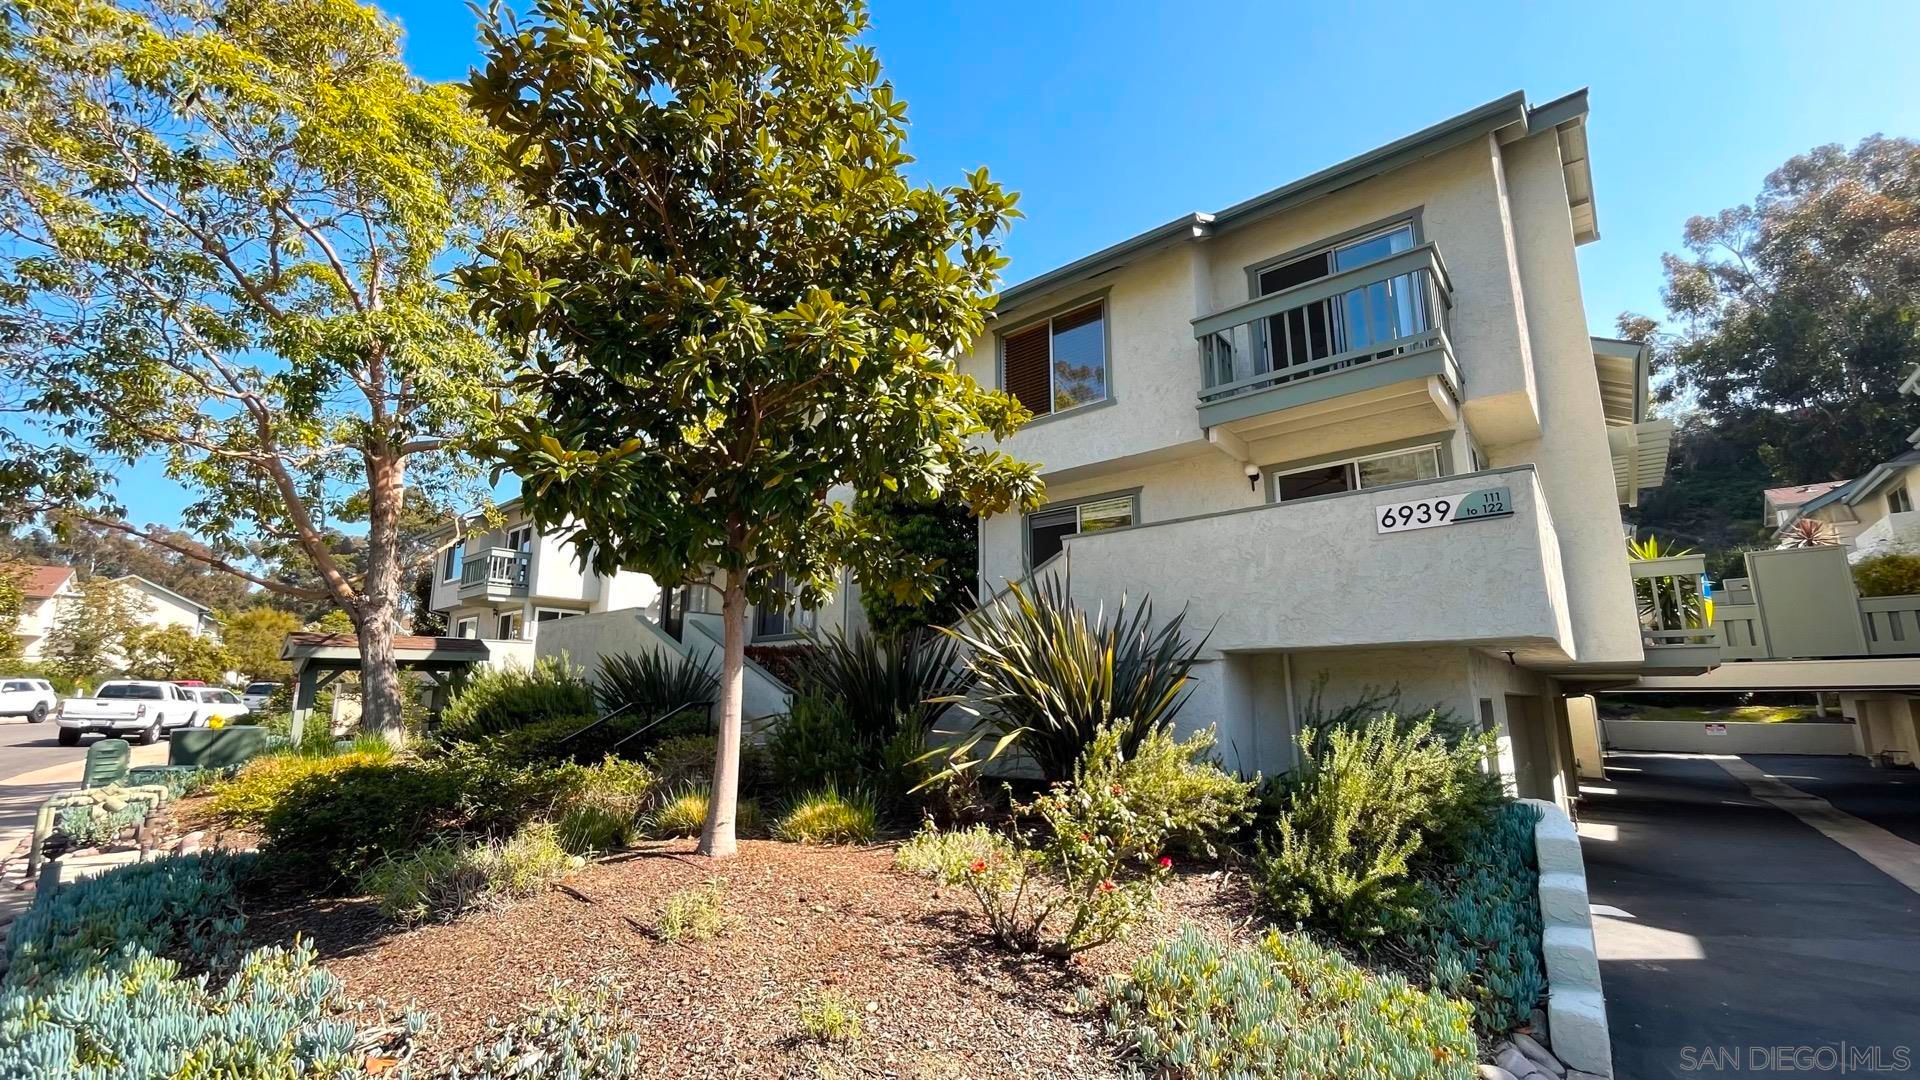 Main Photo: LINDA VISTA Townhouse for sale : 2 bedrooms : 6939 Park Mesa Way #122 in San Diego